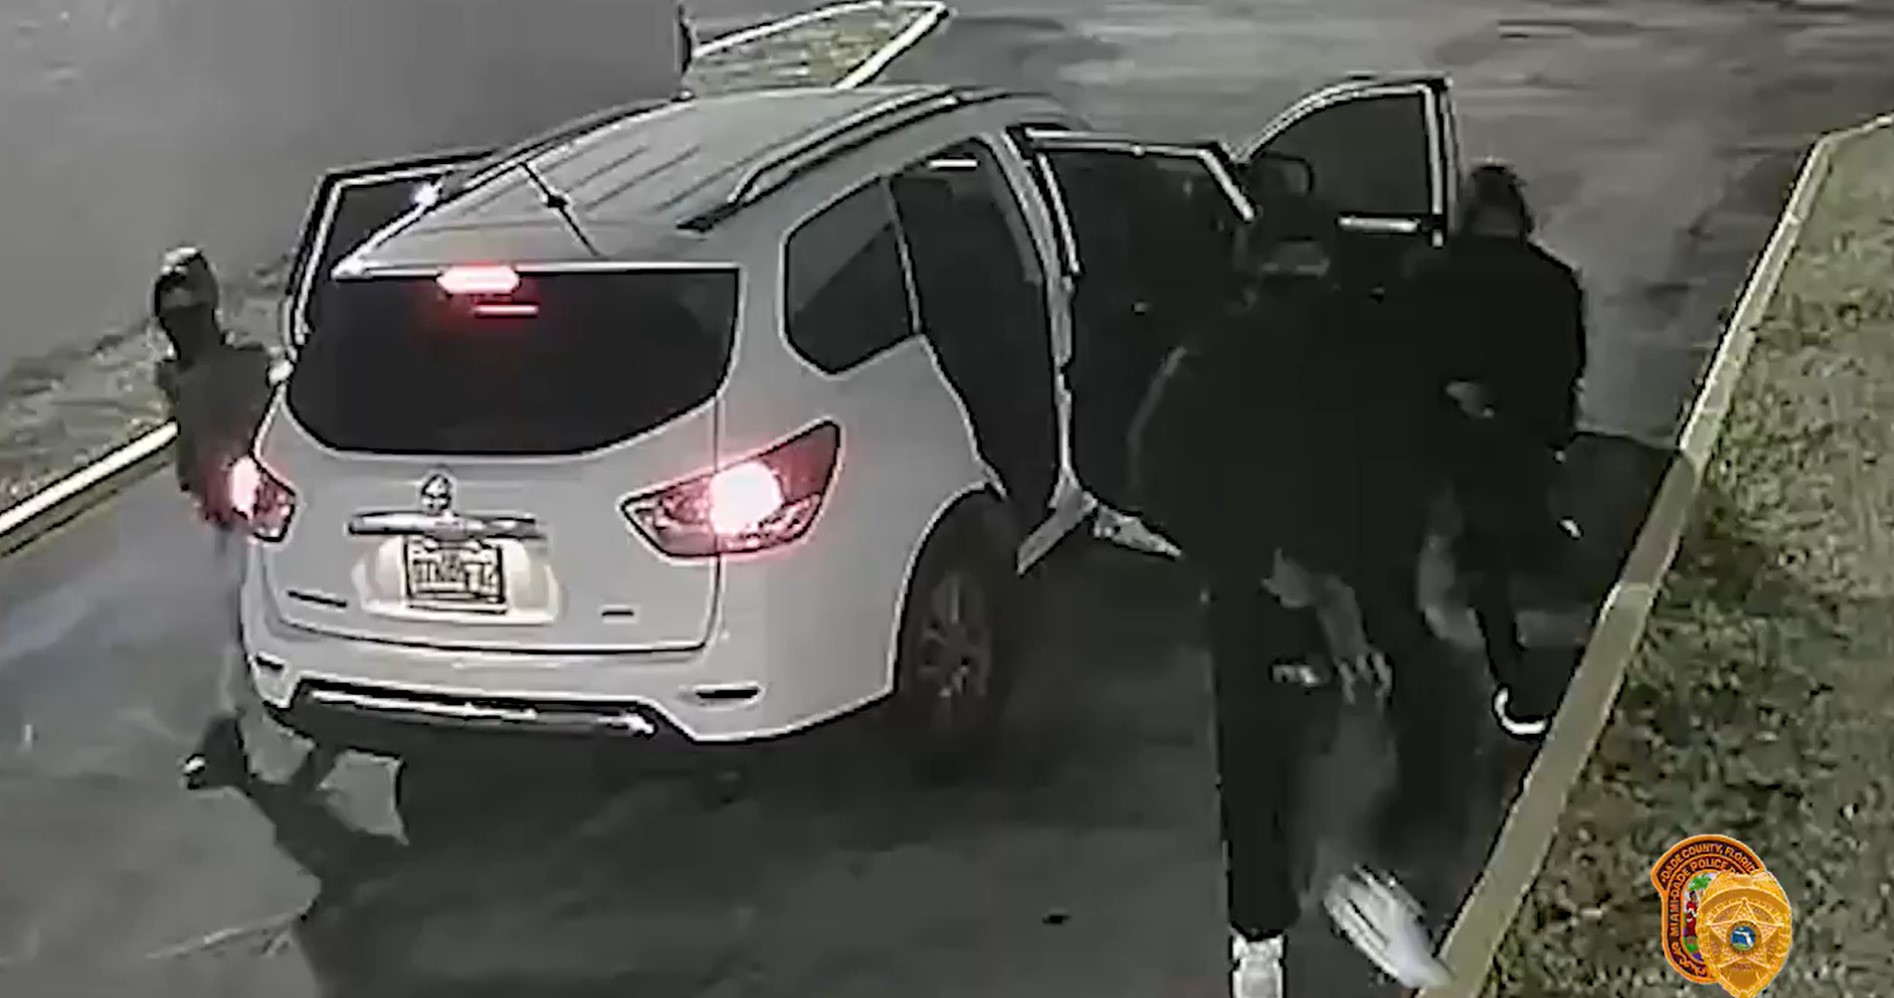 MiamiDade police release surveillance video of suspects in mass shooting